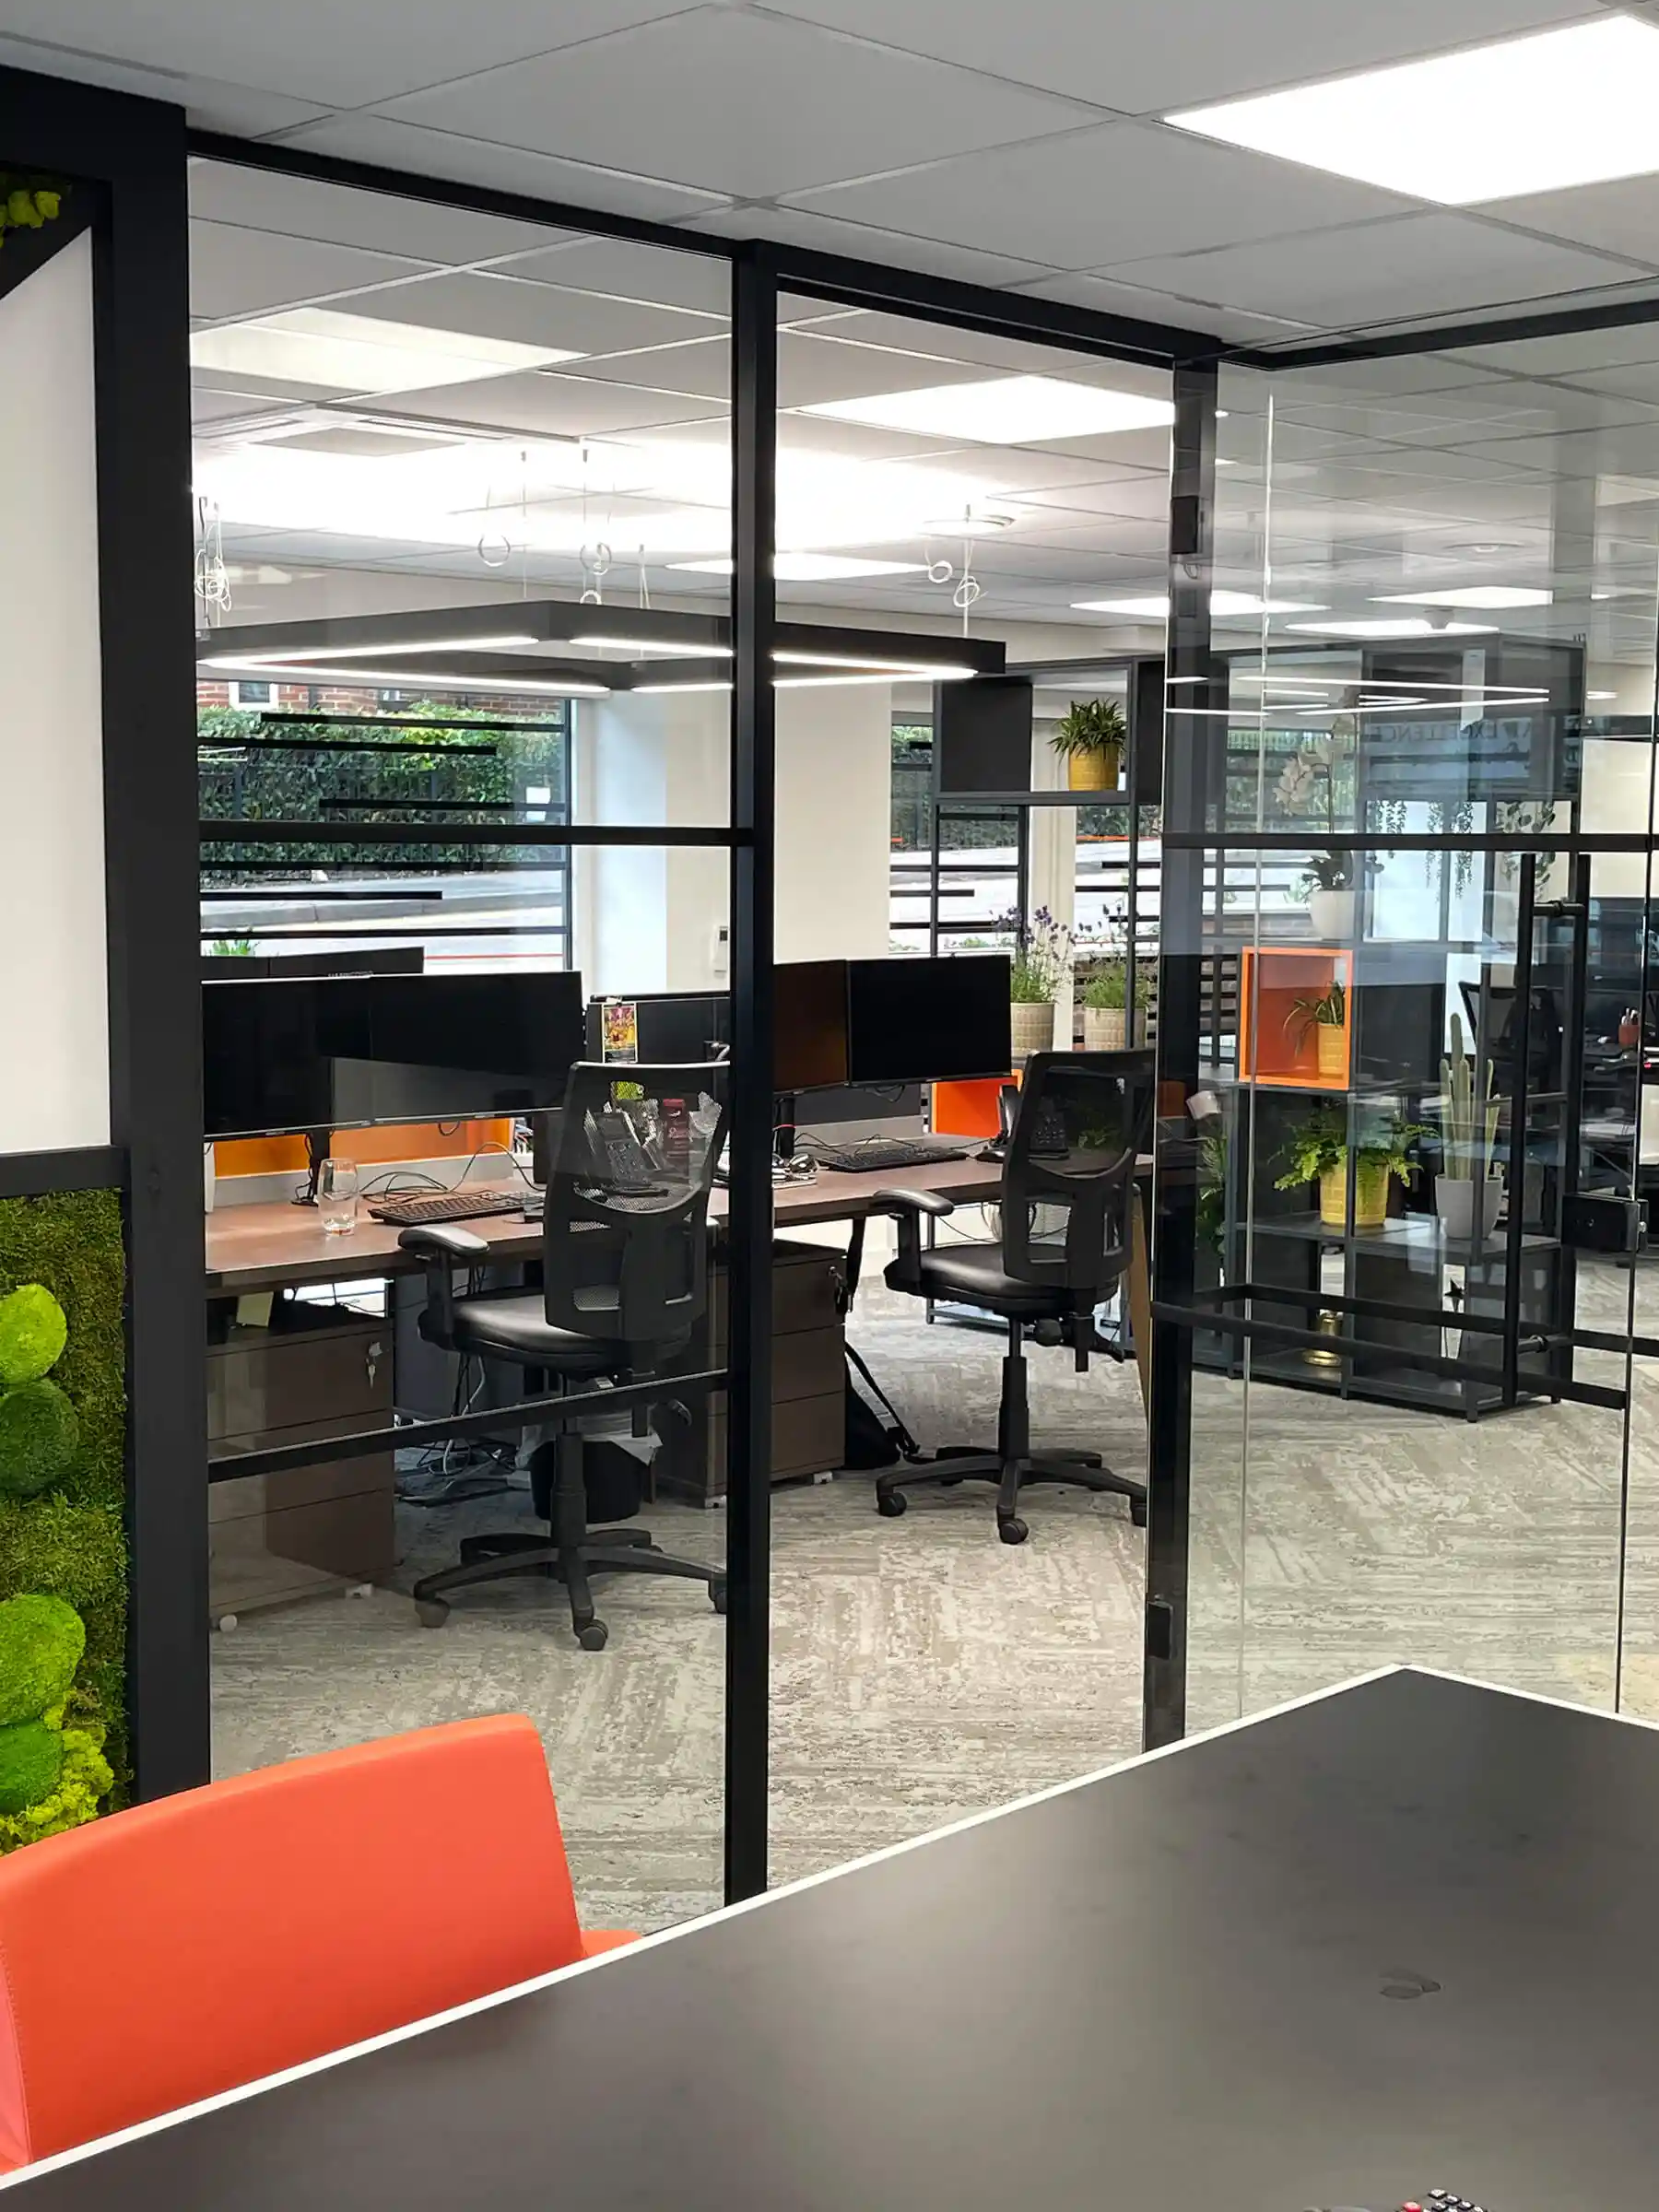 Office space divided with black framed glass doors